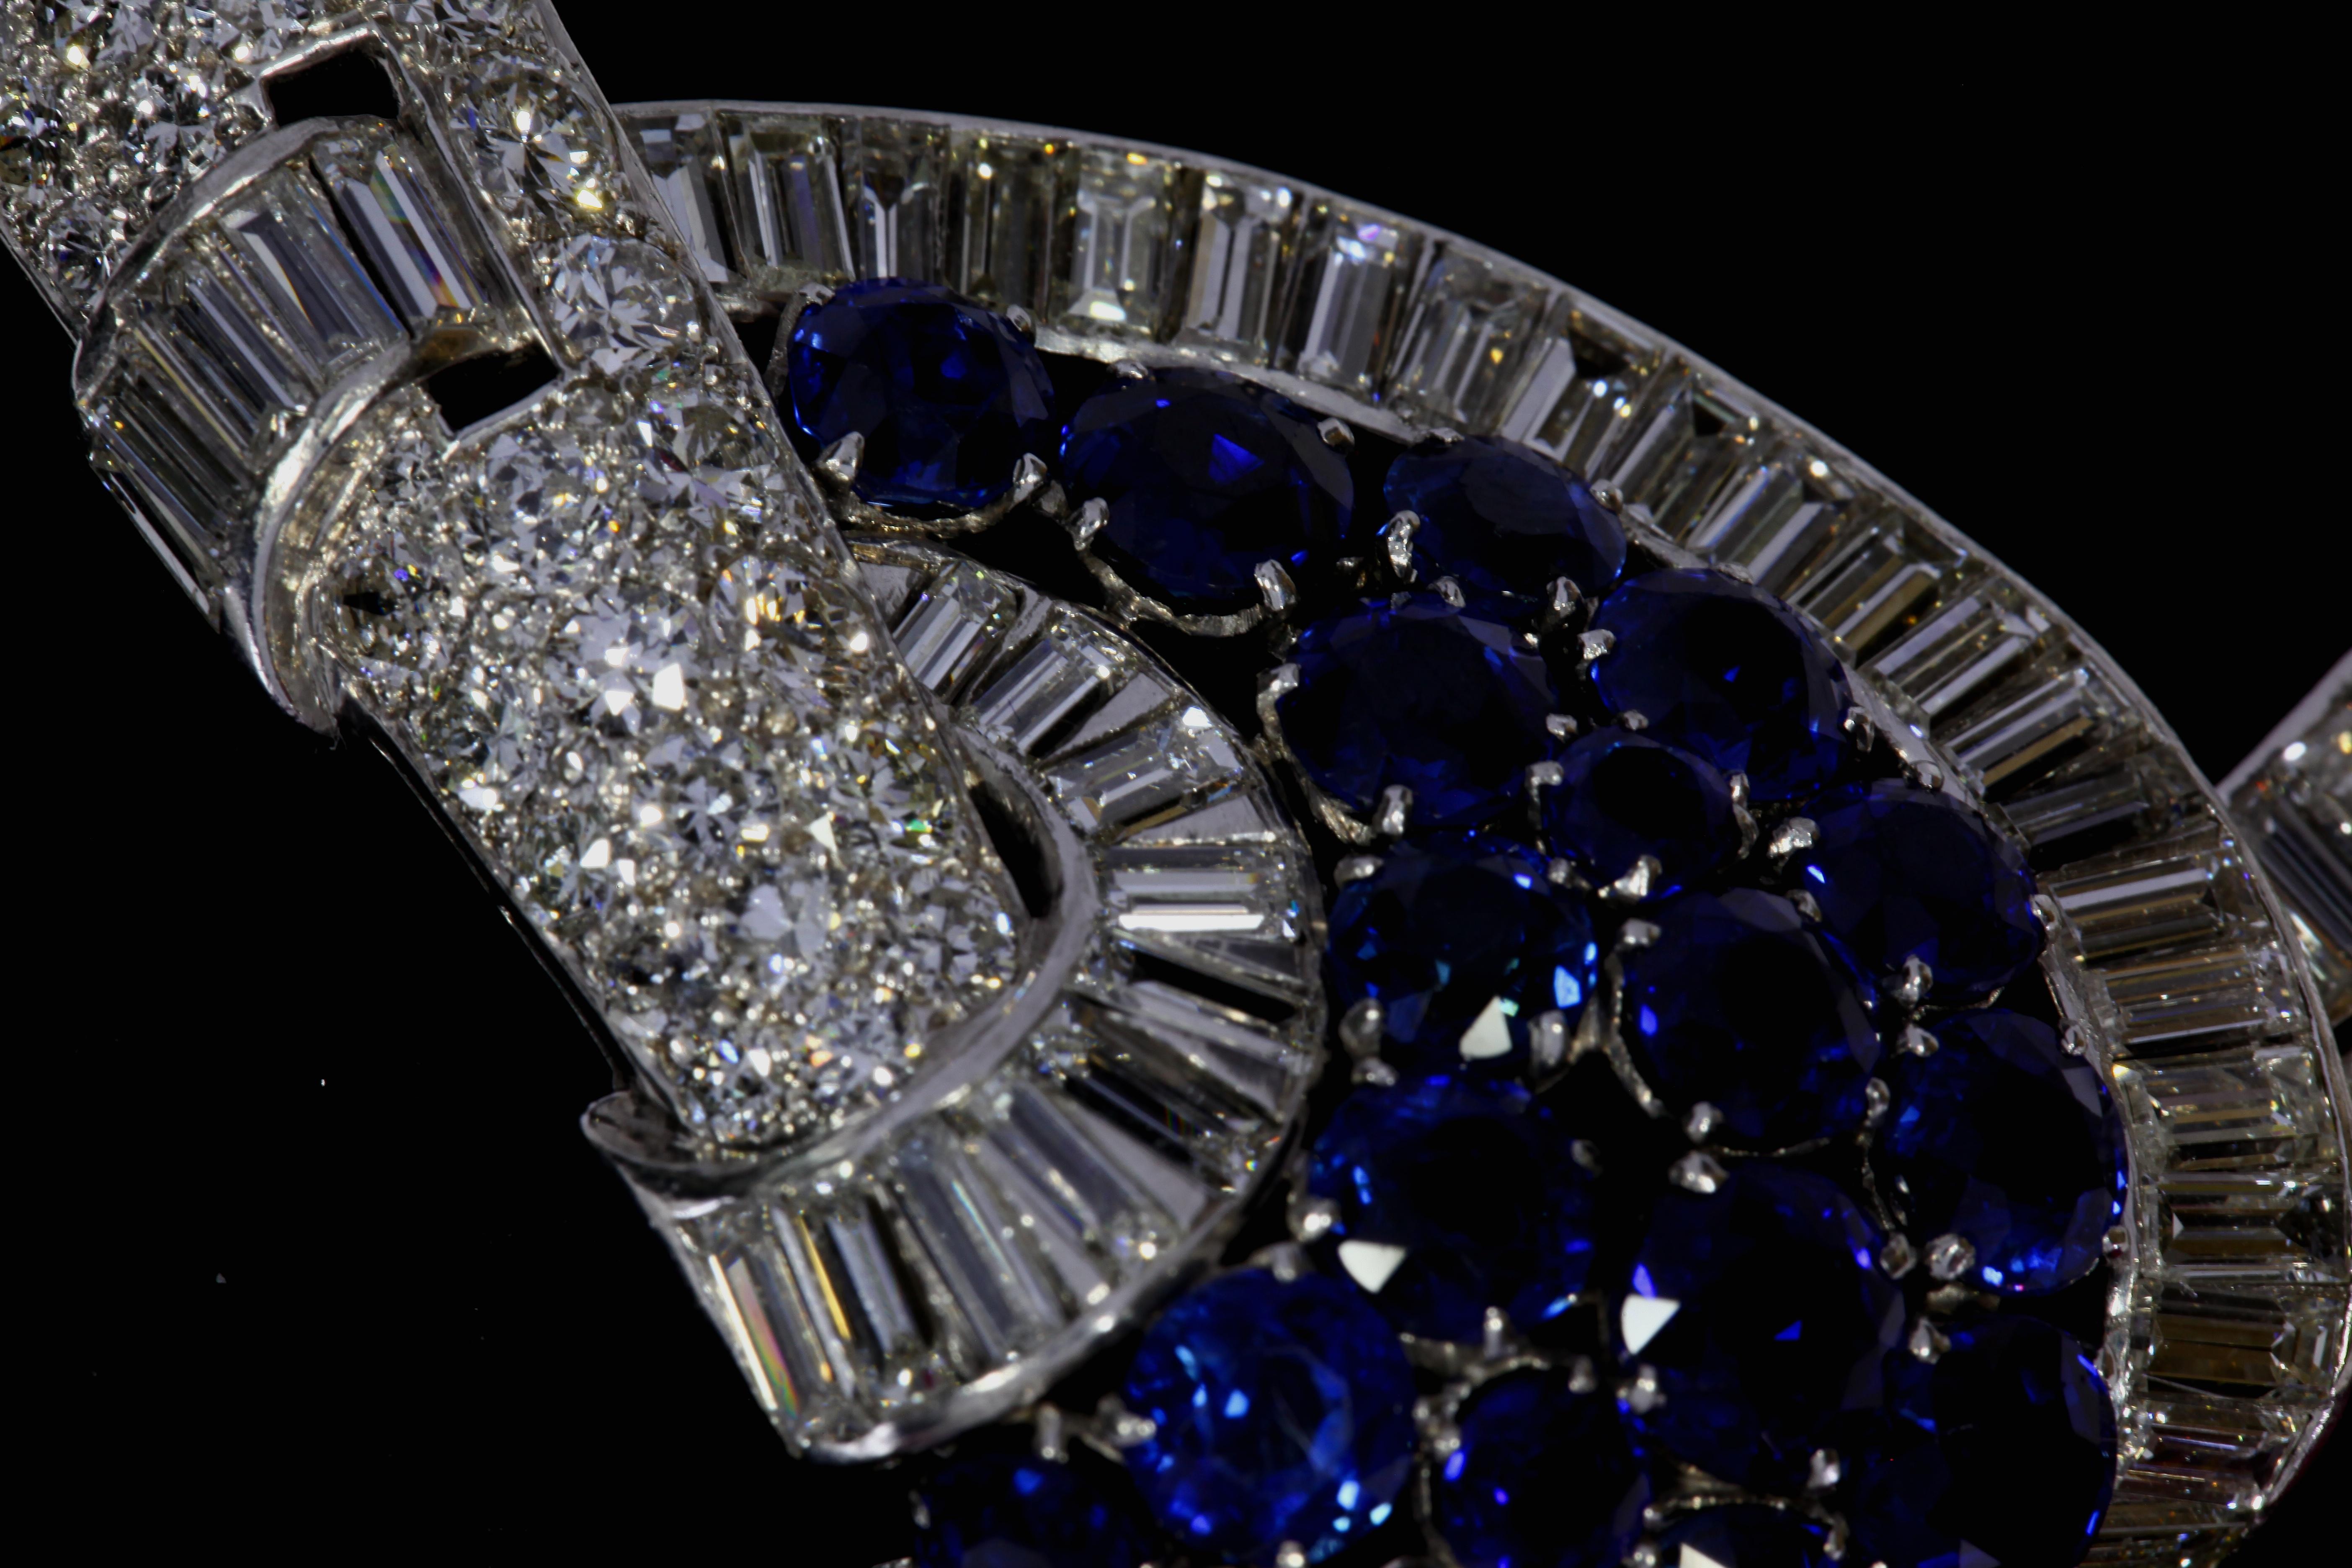 Art Deco Platinum Brooch with Diamonds and Sapphires from circa 1935 im Angebot 1